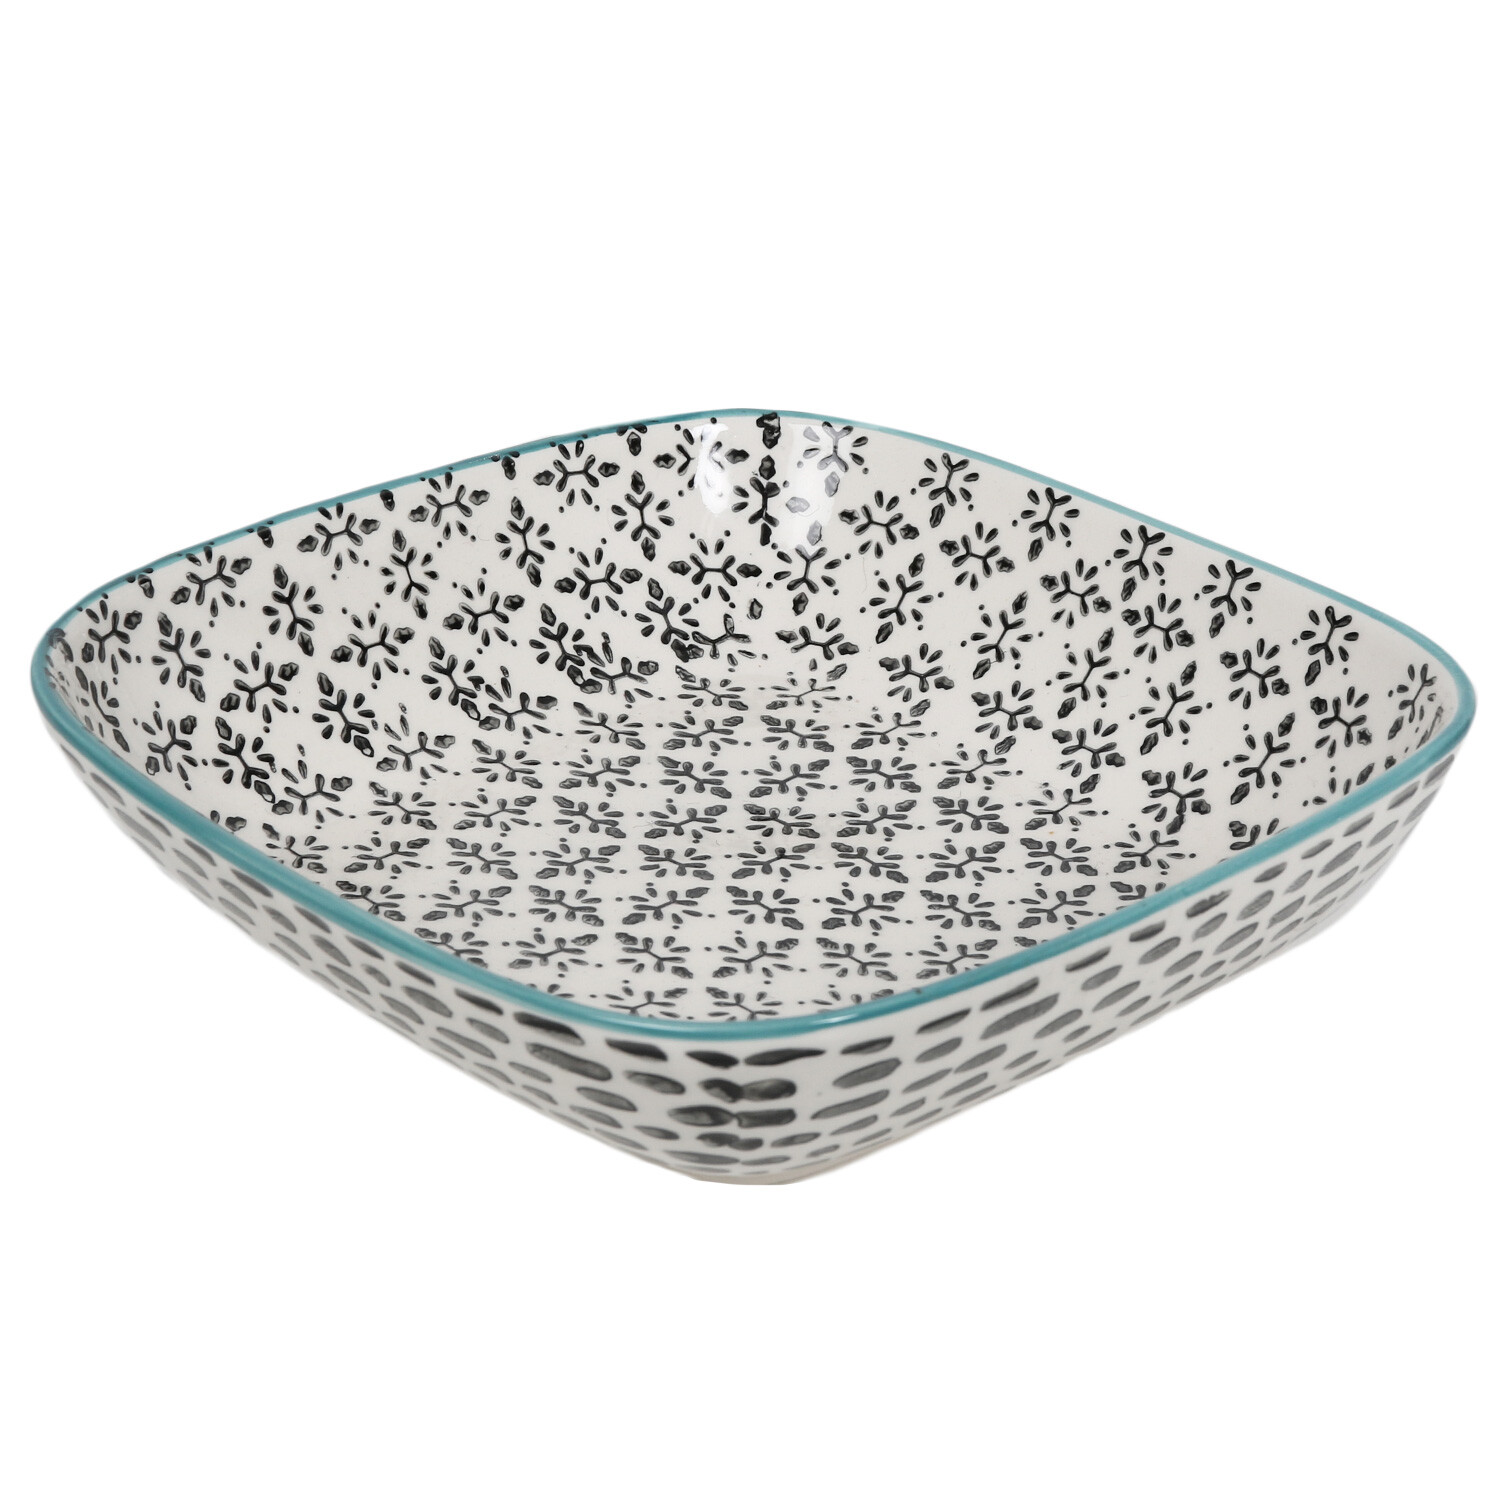 Single Amari Square Serving Bowl in Assorted styles Image 3